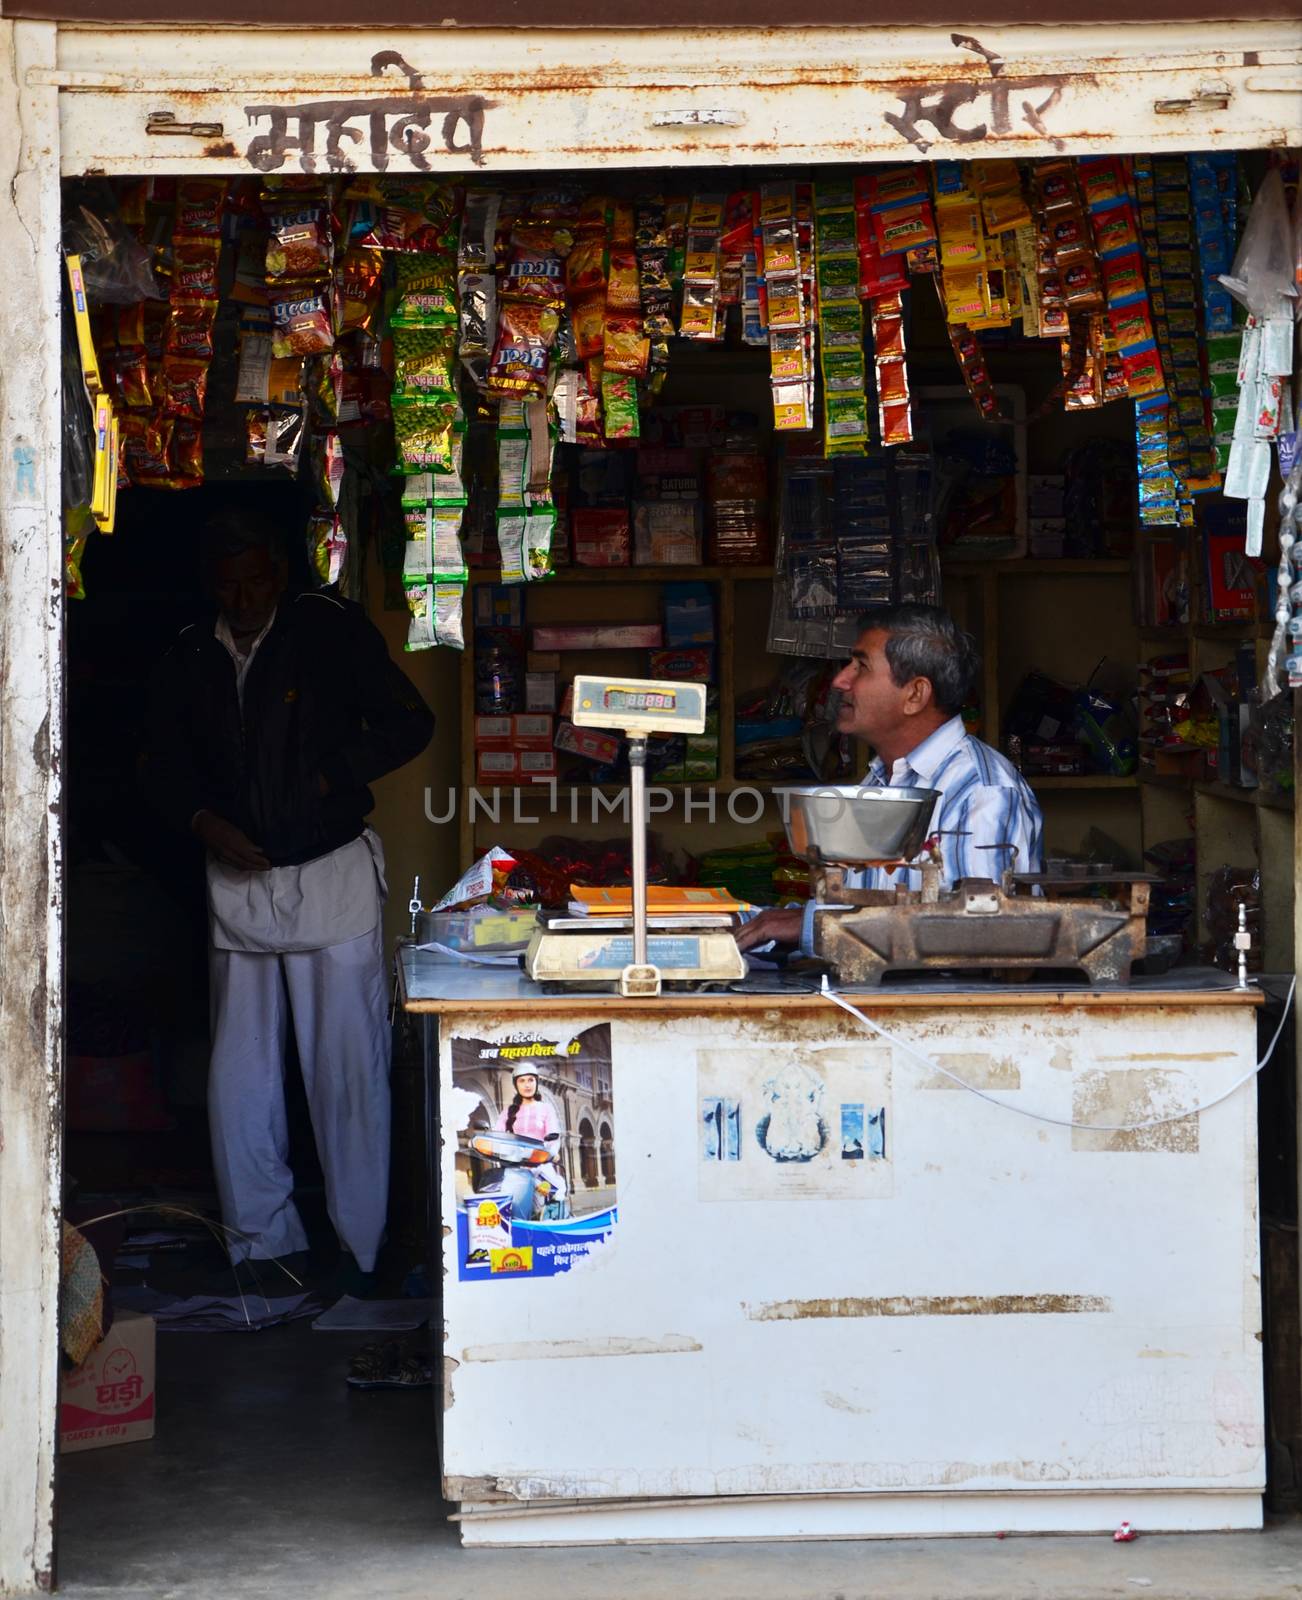 Jodhpur, India - January 1, 2015: Unidentified Indian man selling snack at market in Jodhpur, India. Jodhpur is famously known as the blue city.